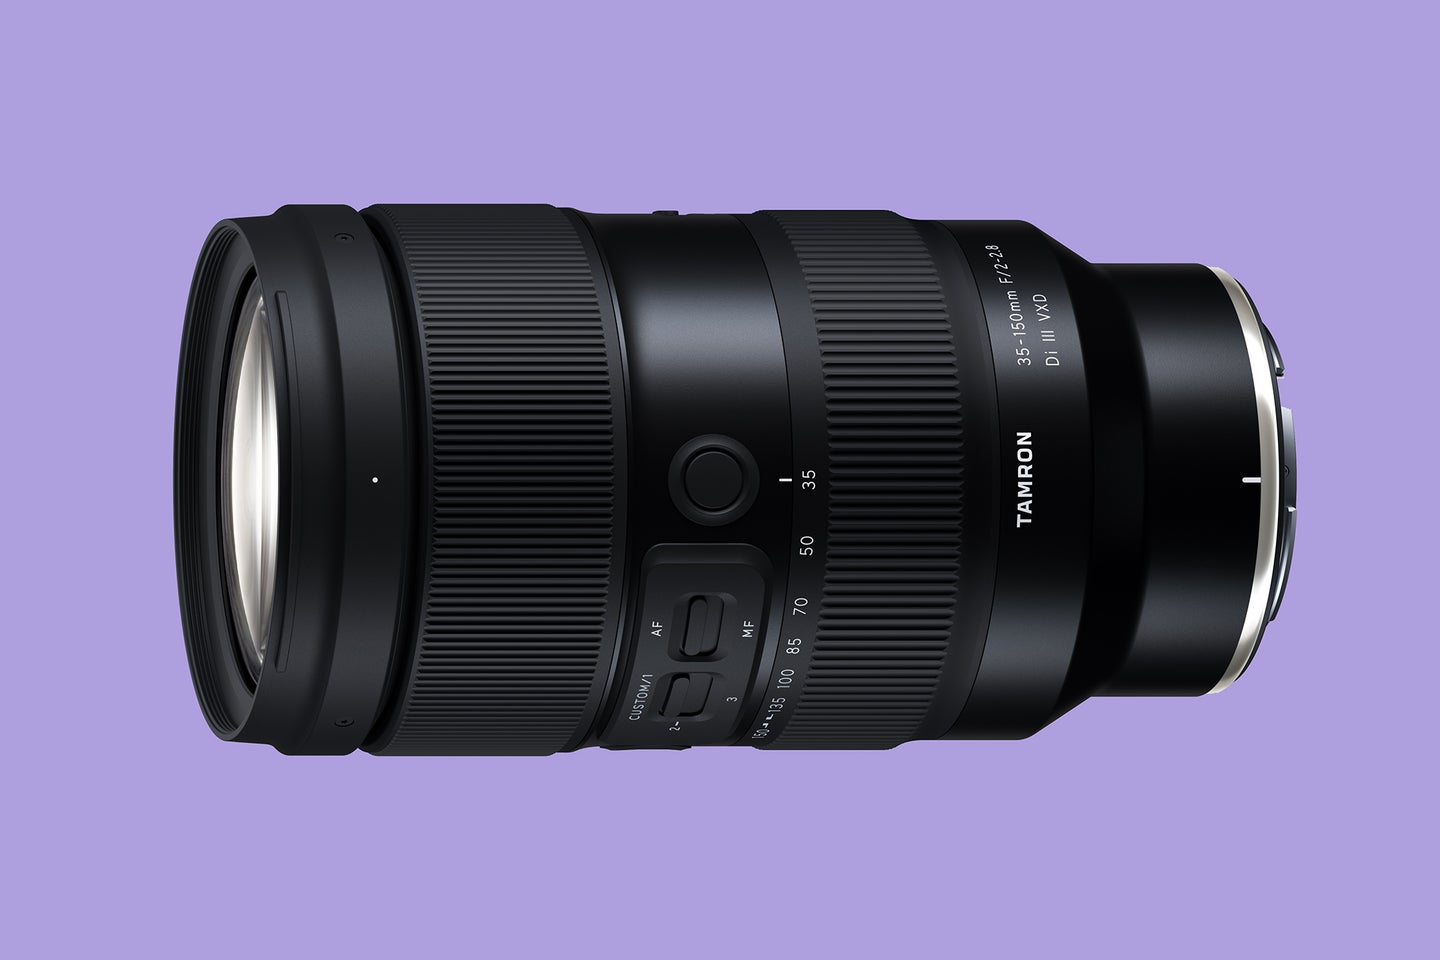 Tamron 35-150mm f/2-2.8 lens against a purple background